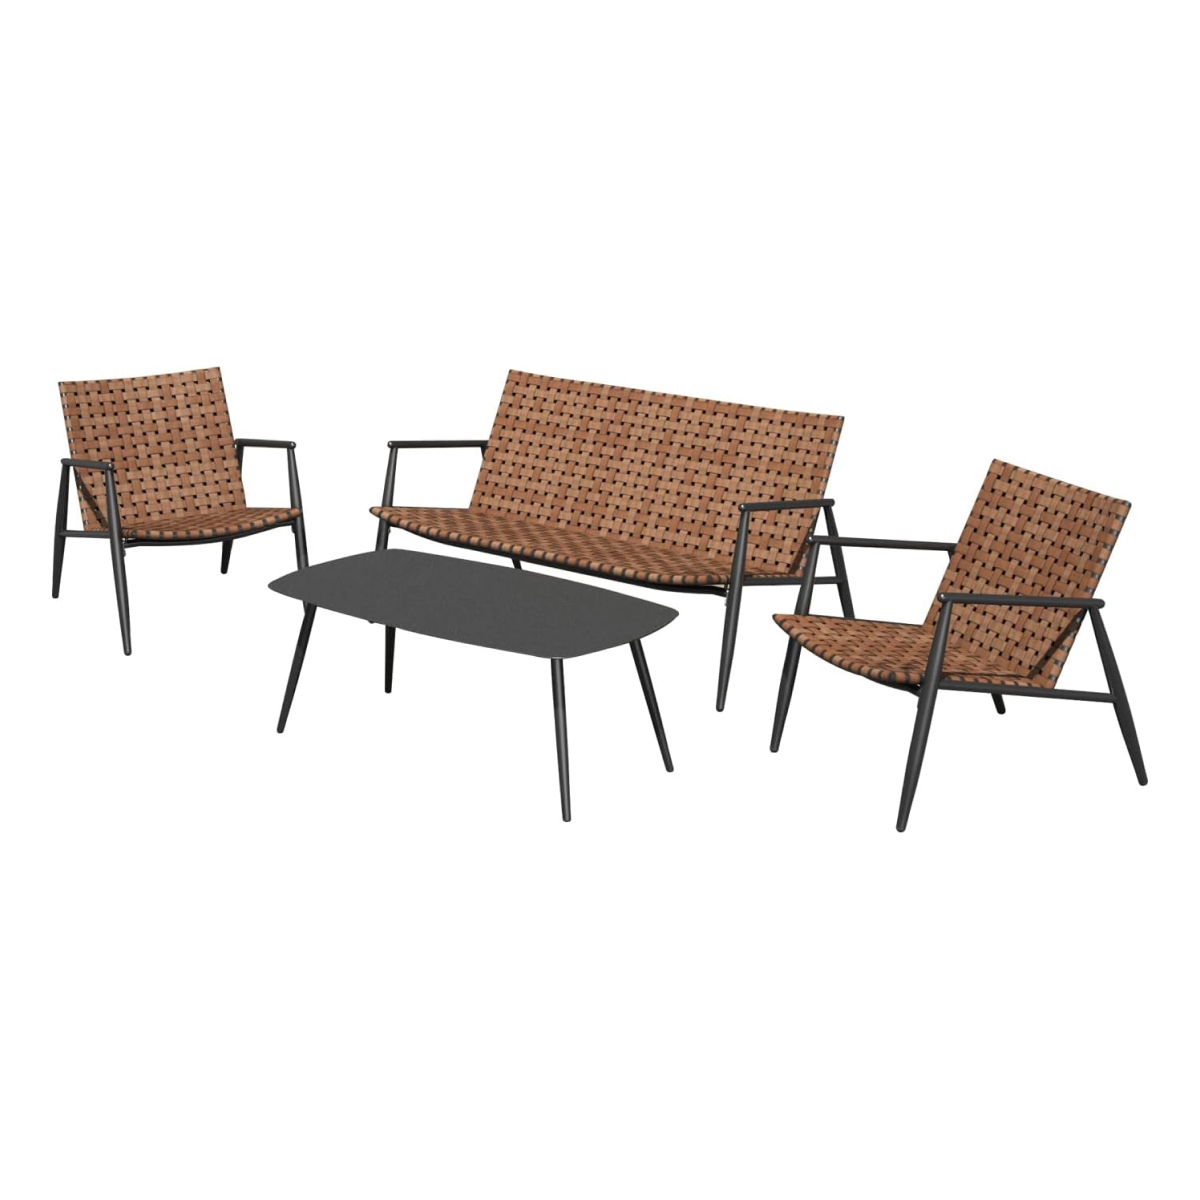 OUTDOOR AKSEL Woven Retro Lounge Chairs 4PCS